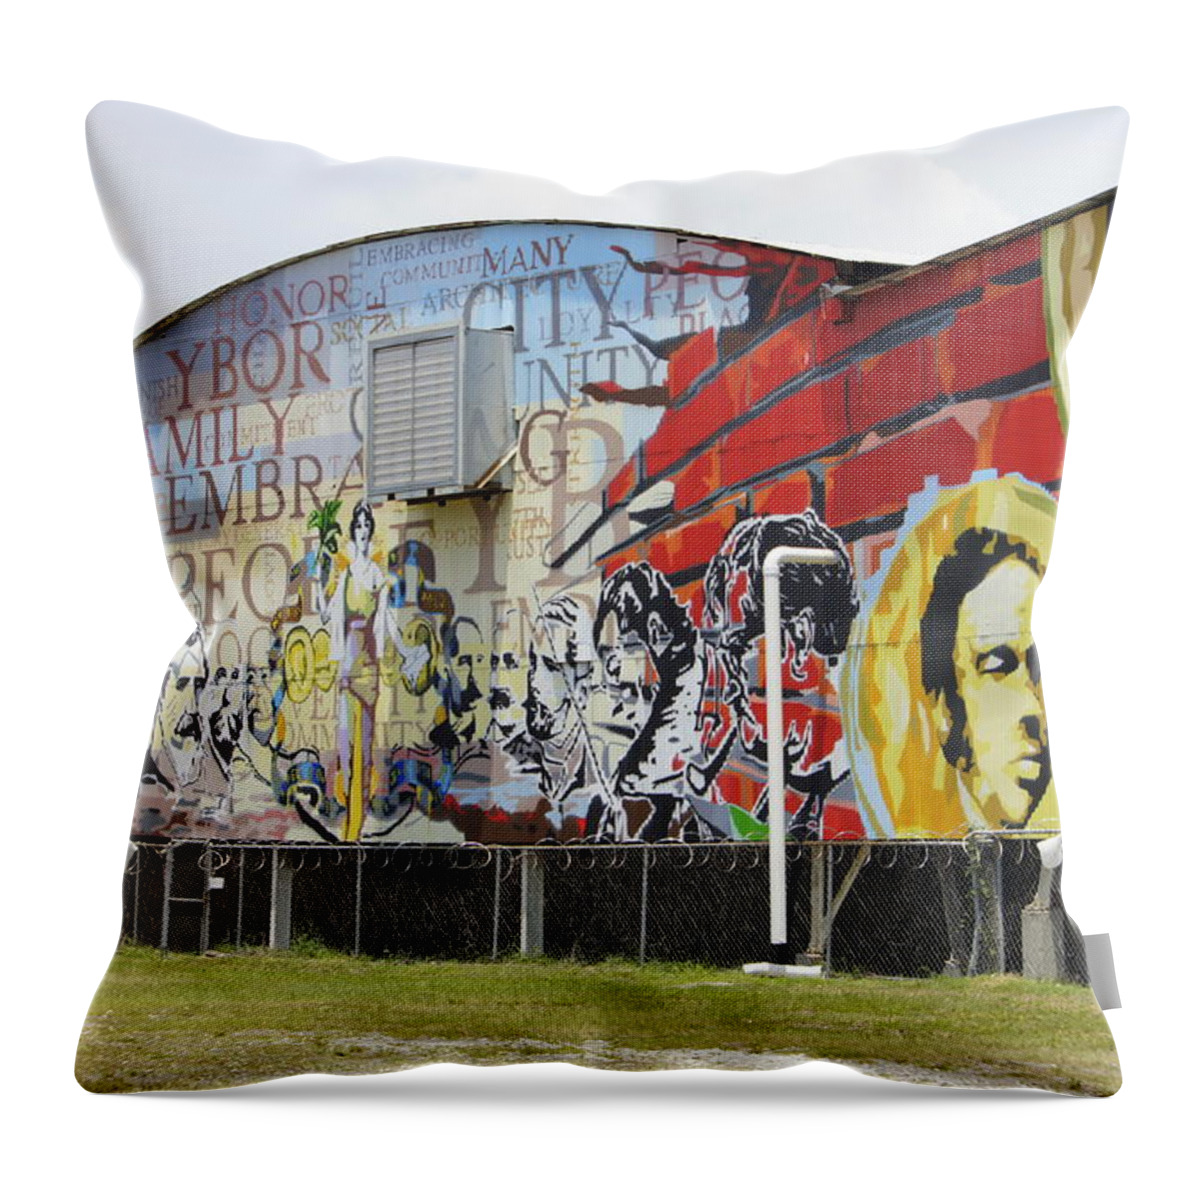 Ybor City Throw Pillow featuring the photograph Ybor Mural by Laurie Perry